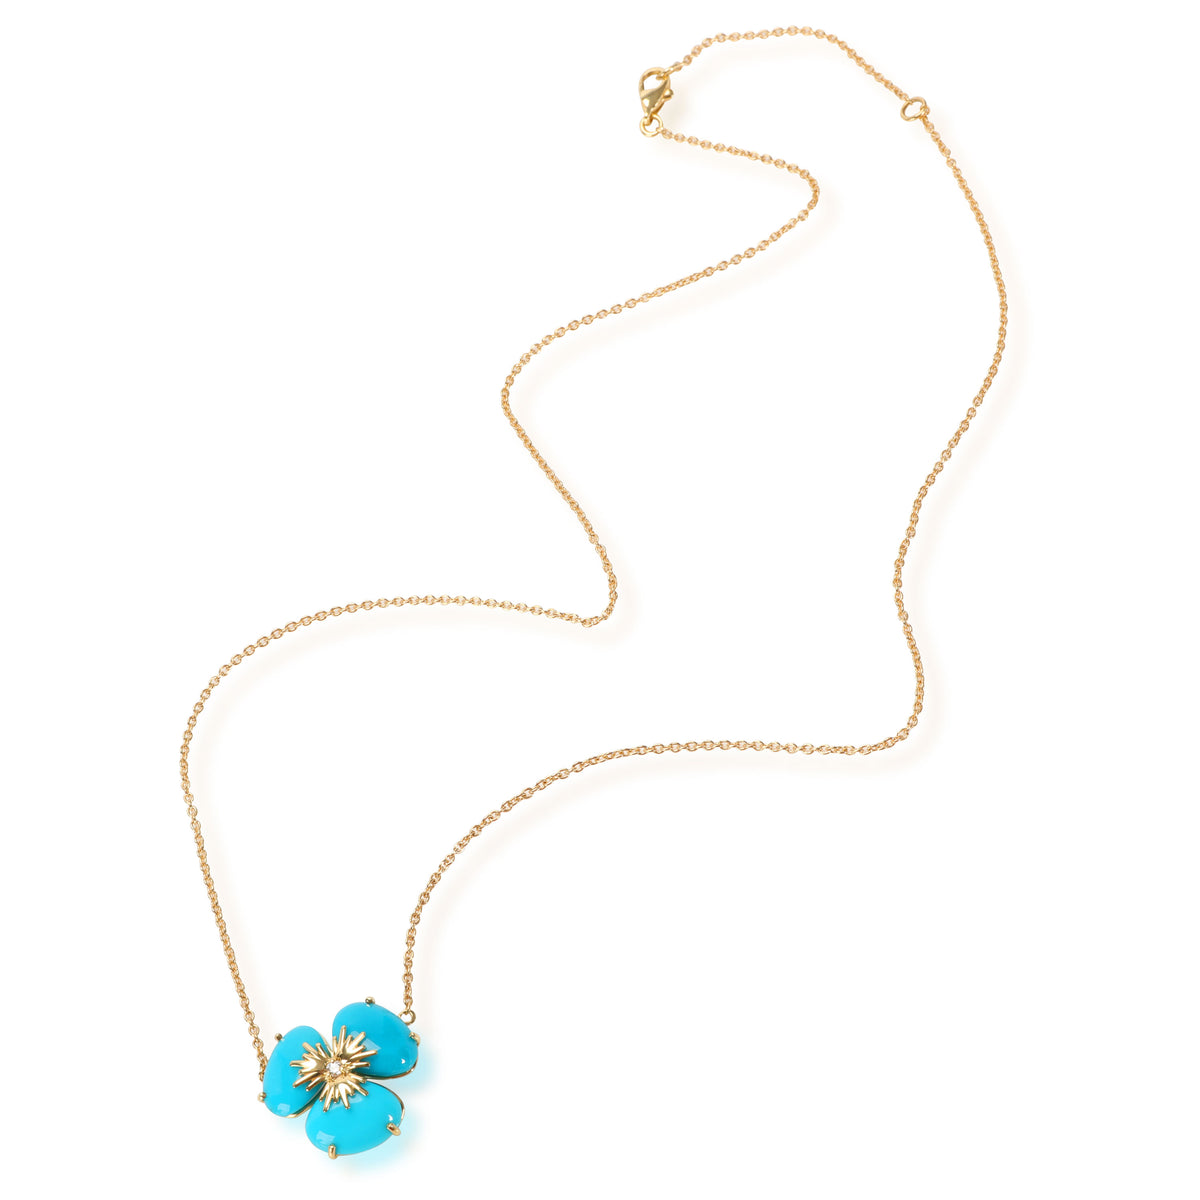 Turquoise Diamond Flower Necklace in 18K Yellow Gold 0.02 CTW